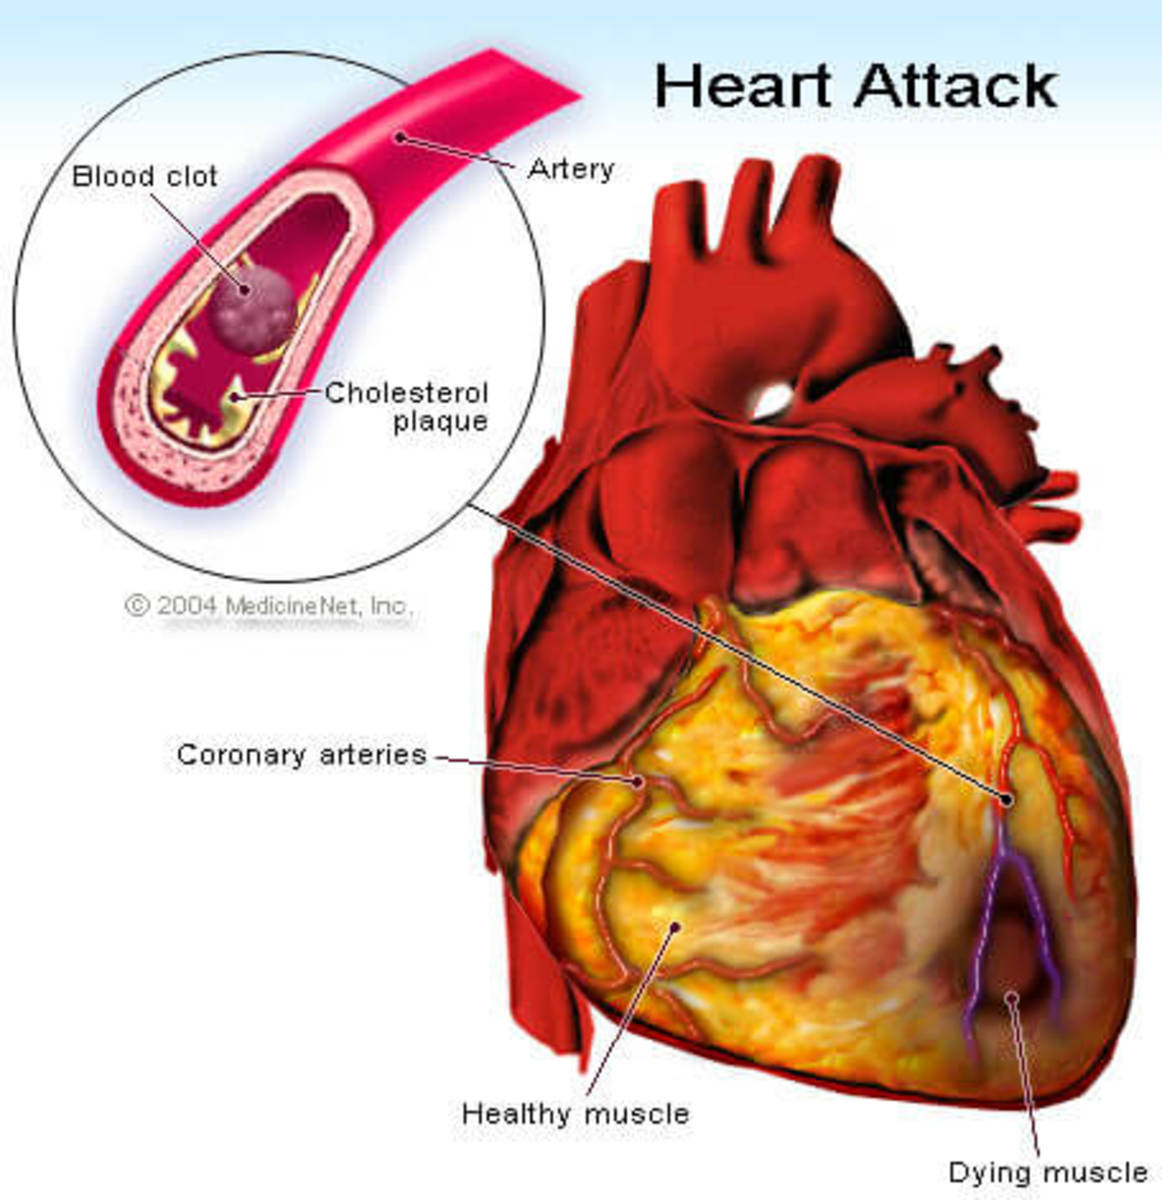 Signs and Symptoms: How You Can Know if You are Having a Heart Attack!